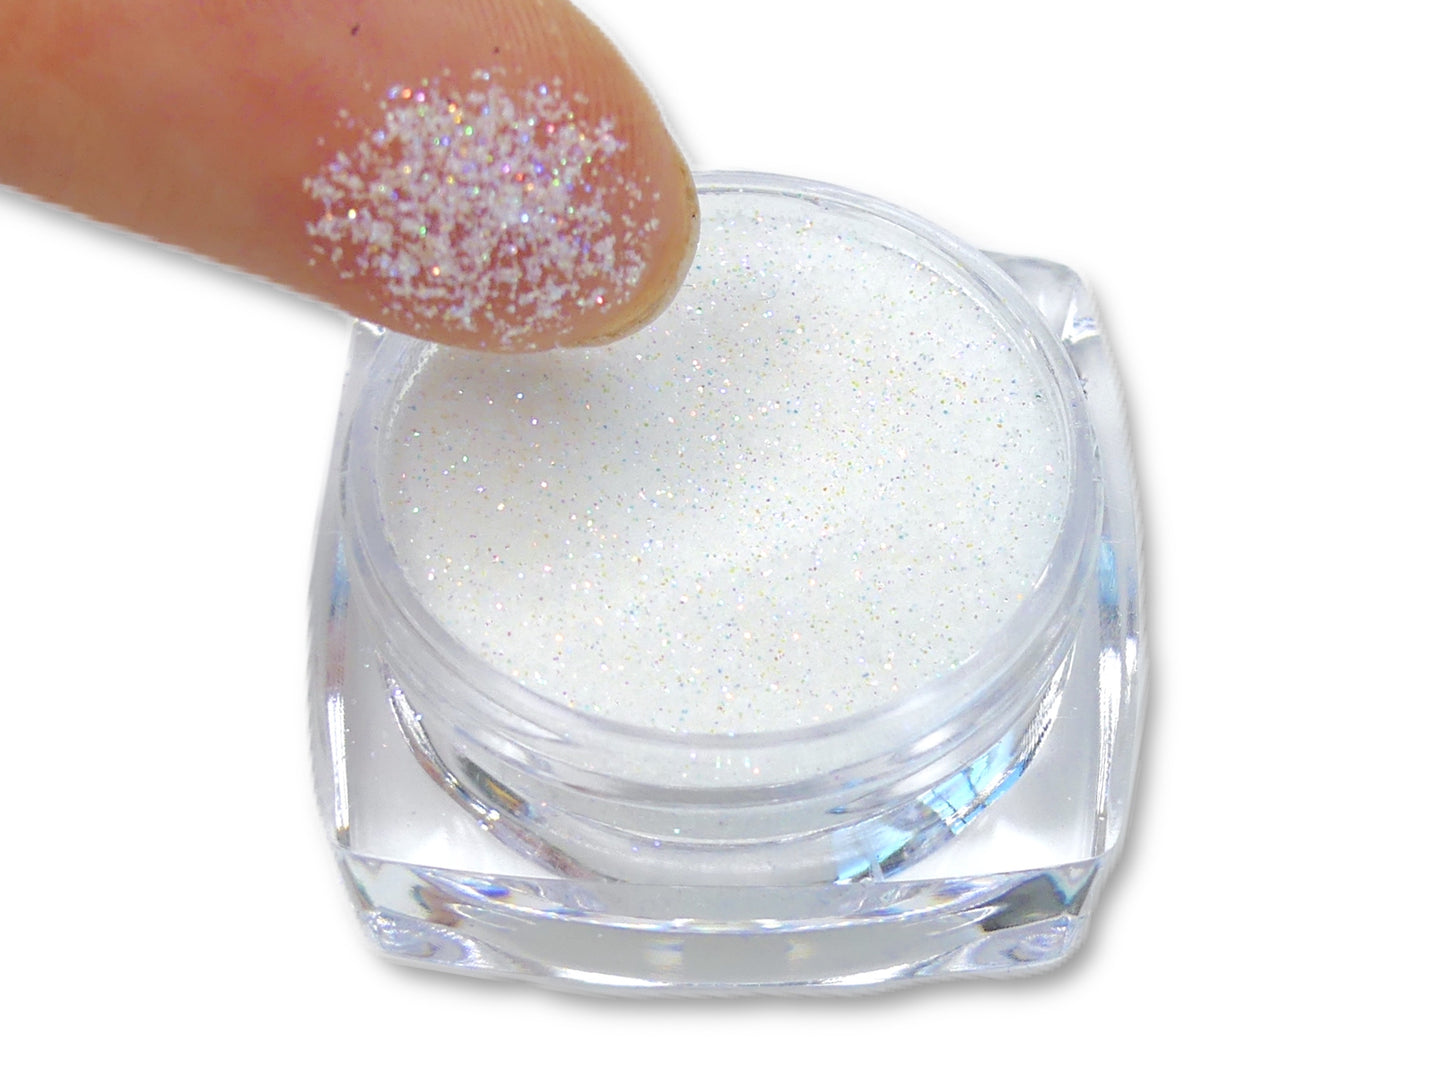 Load image into Gallery viewer, White Sugar 2g - My Little Nail Art Shop
